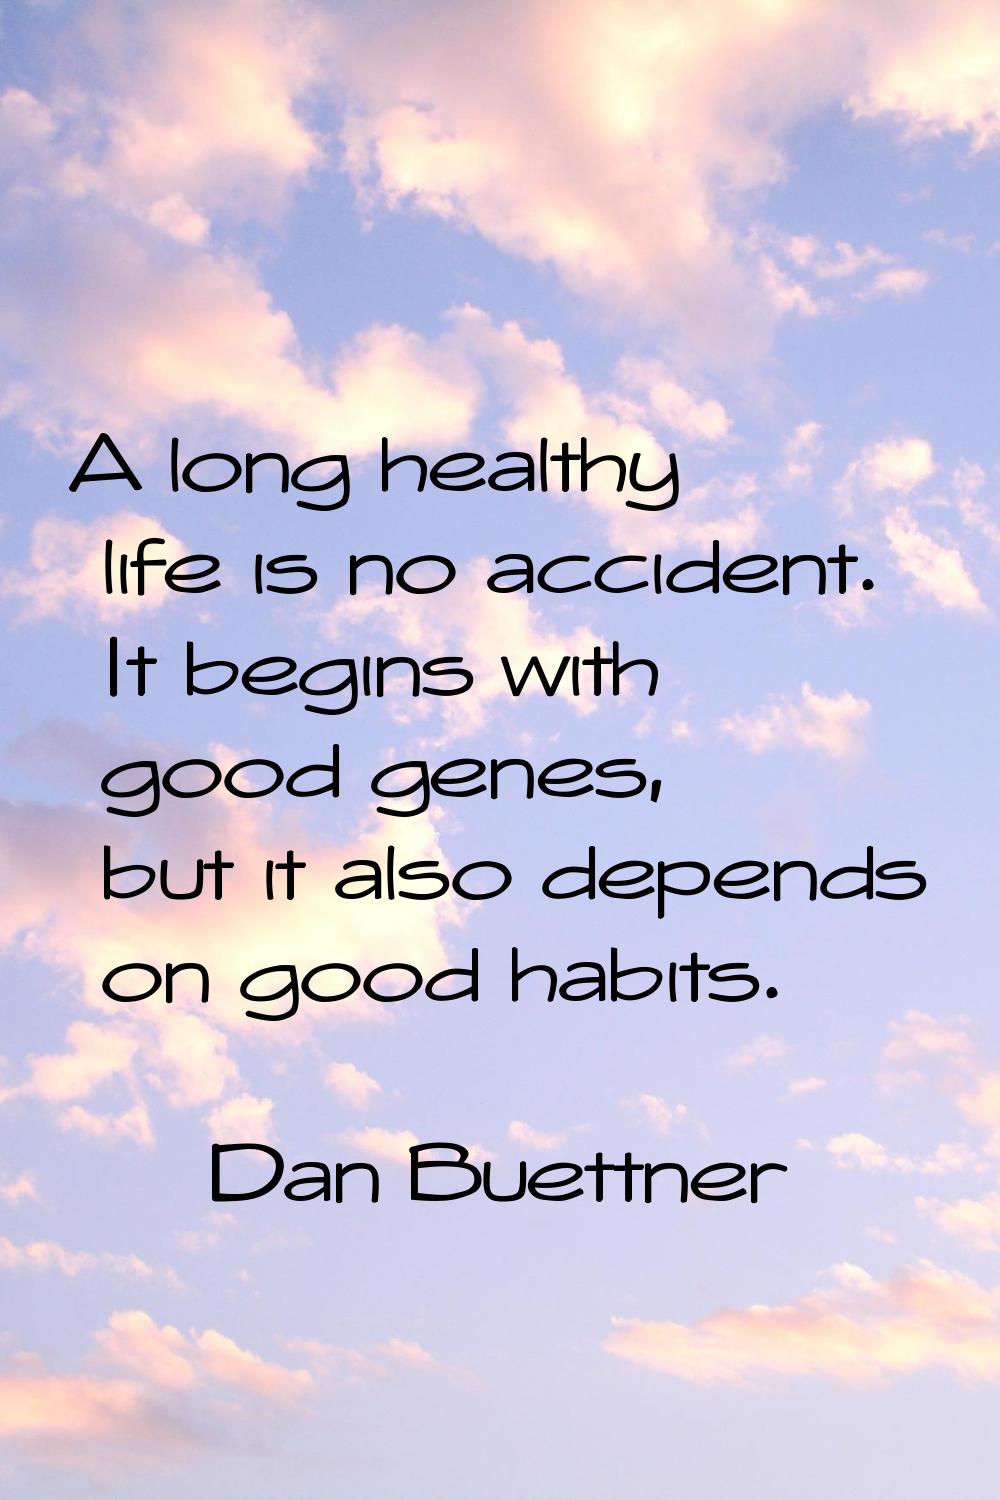 A long healthy life is no accident. It begins with good genes, but it also depends on good habits.